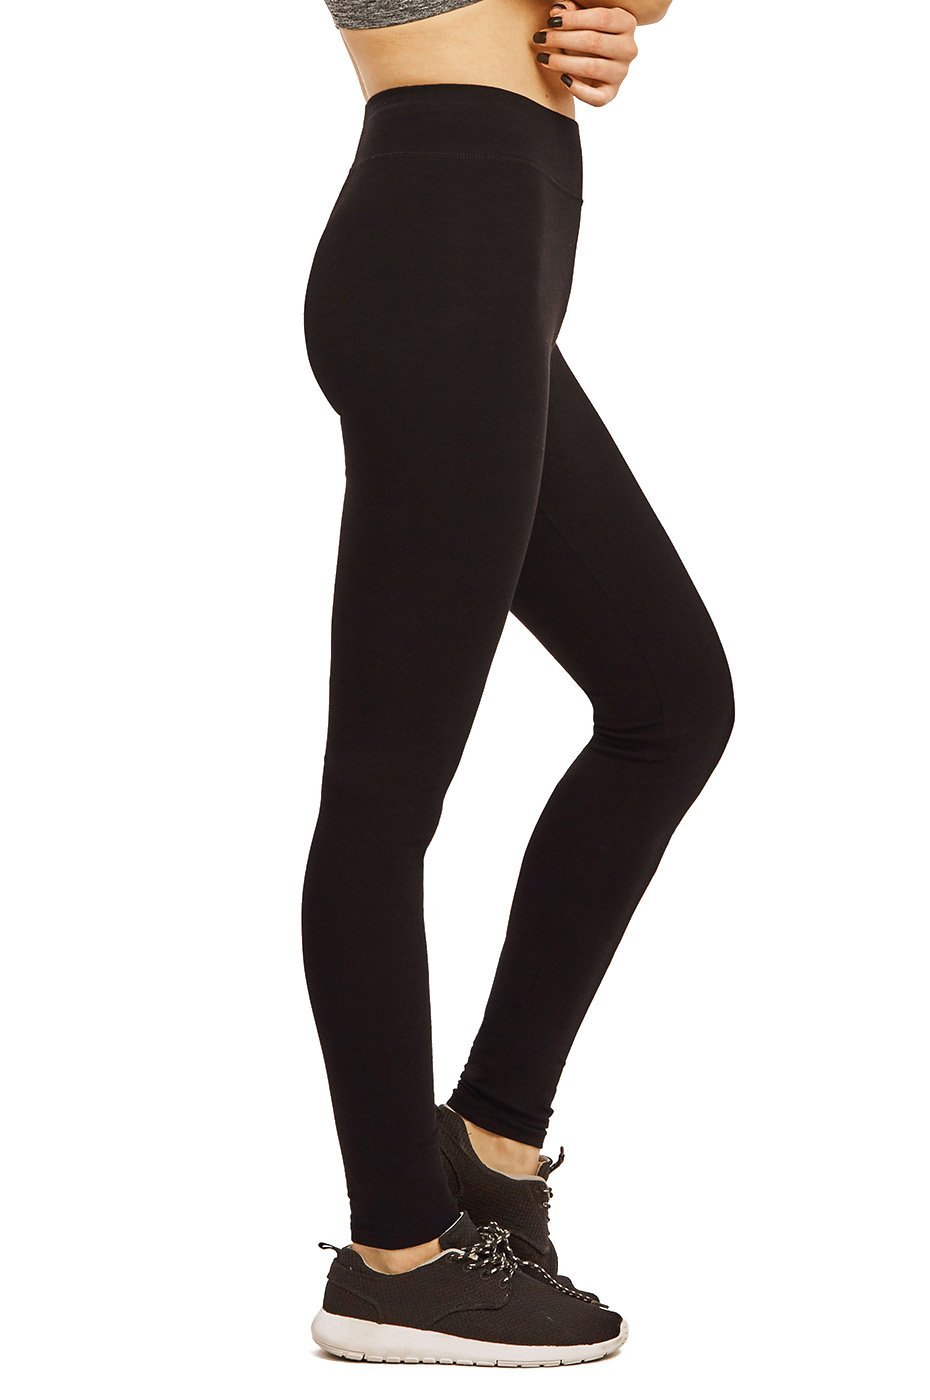 1007 Women's Cotton Spandex Leggings custom embroidered or printed with  your logo.